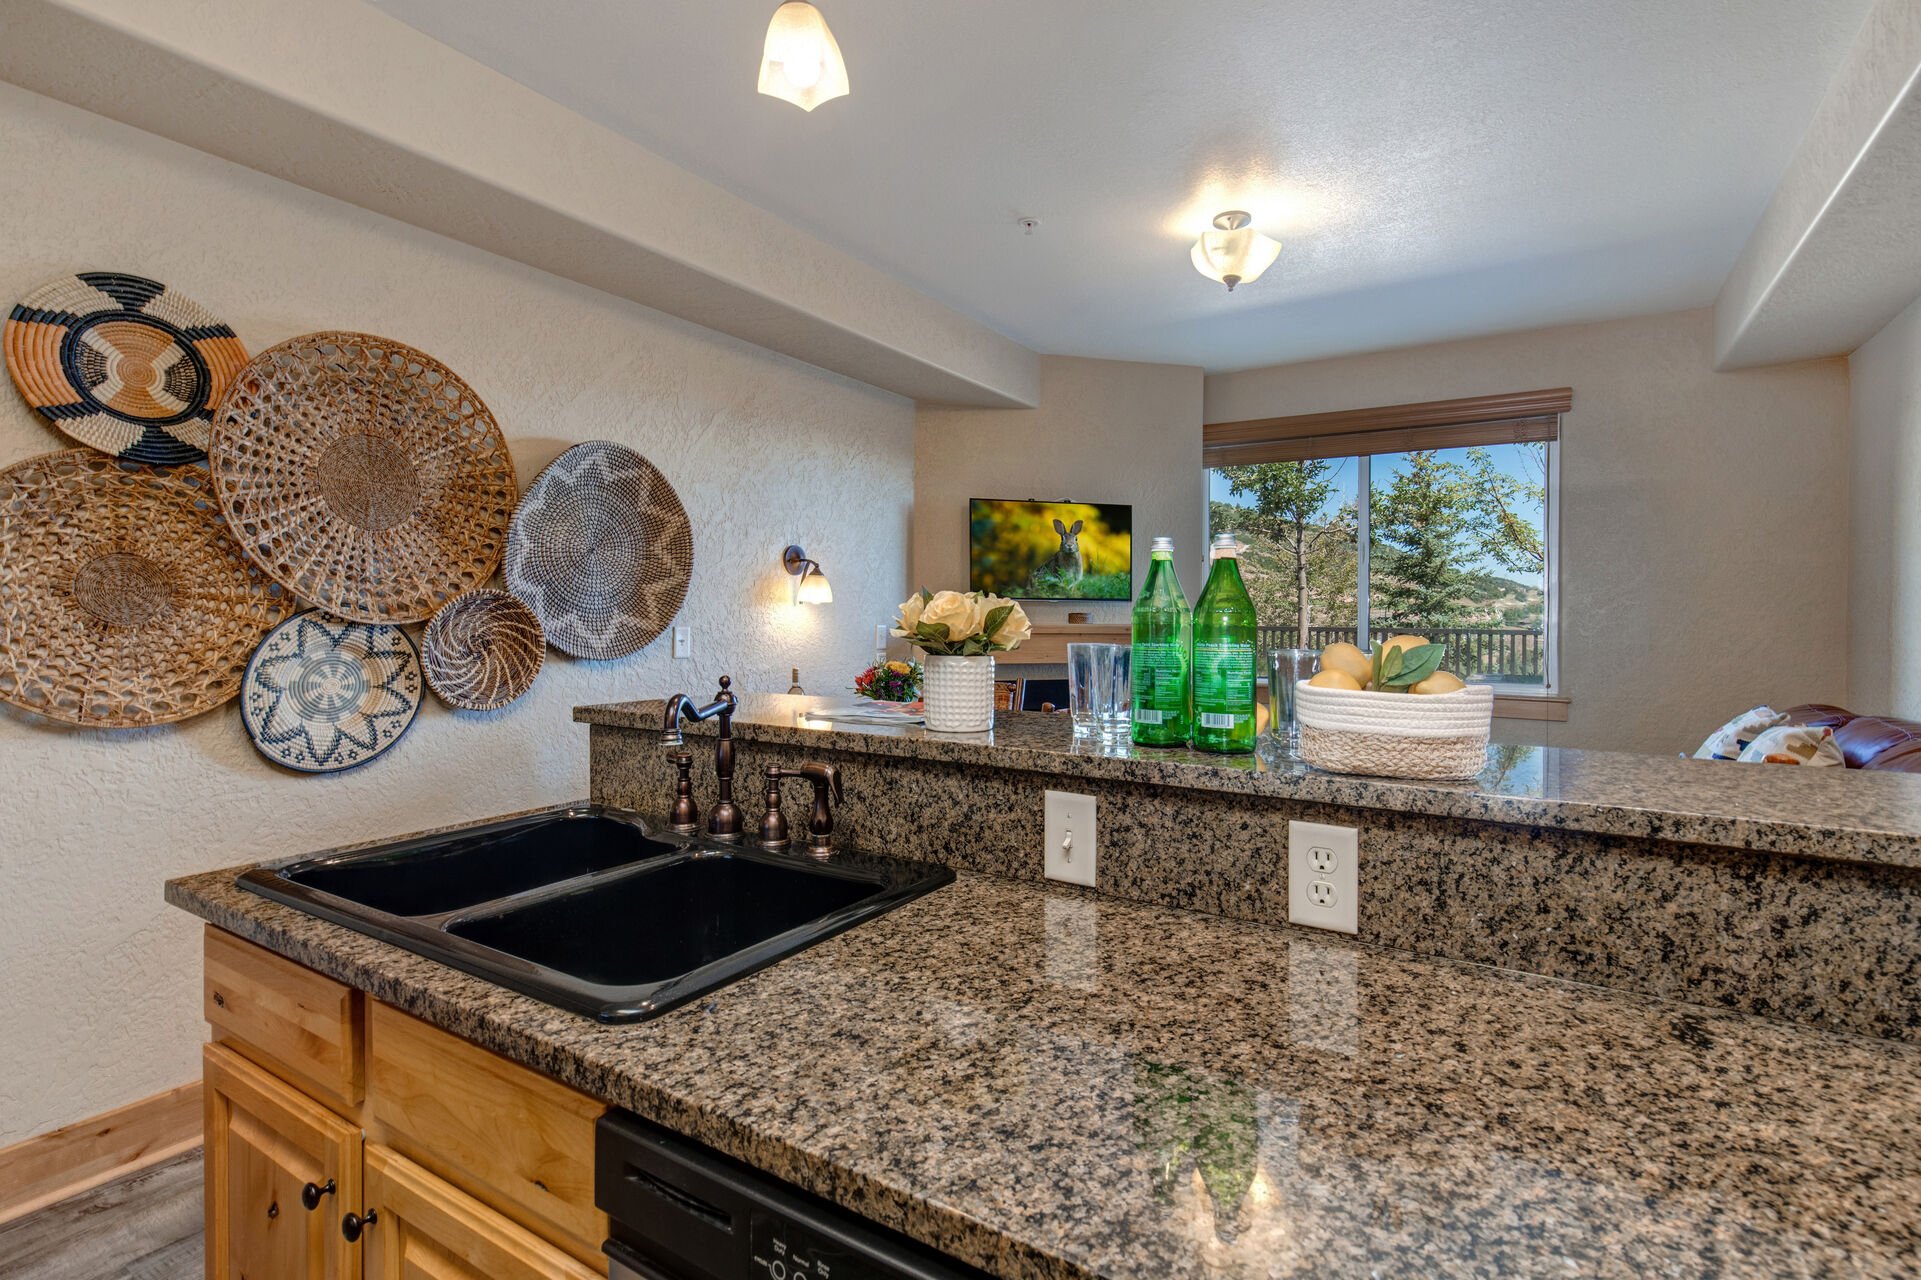 Fully Equipped Kitchen with beautiful stone countertops, stainless steel appliances, ice maker, and bar seating for 3